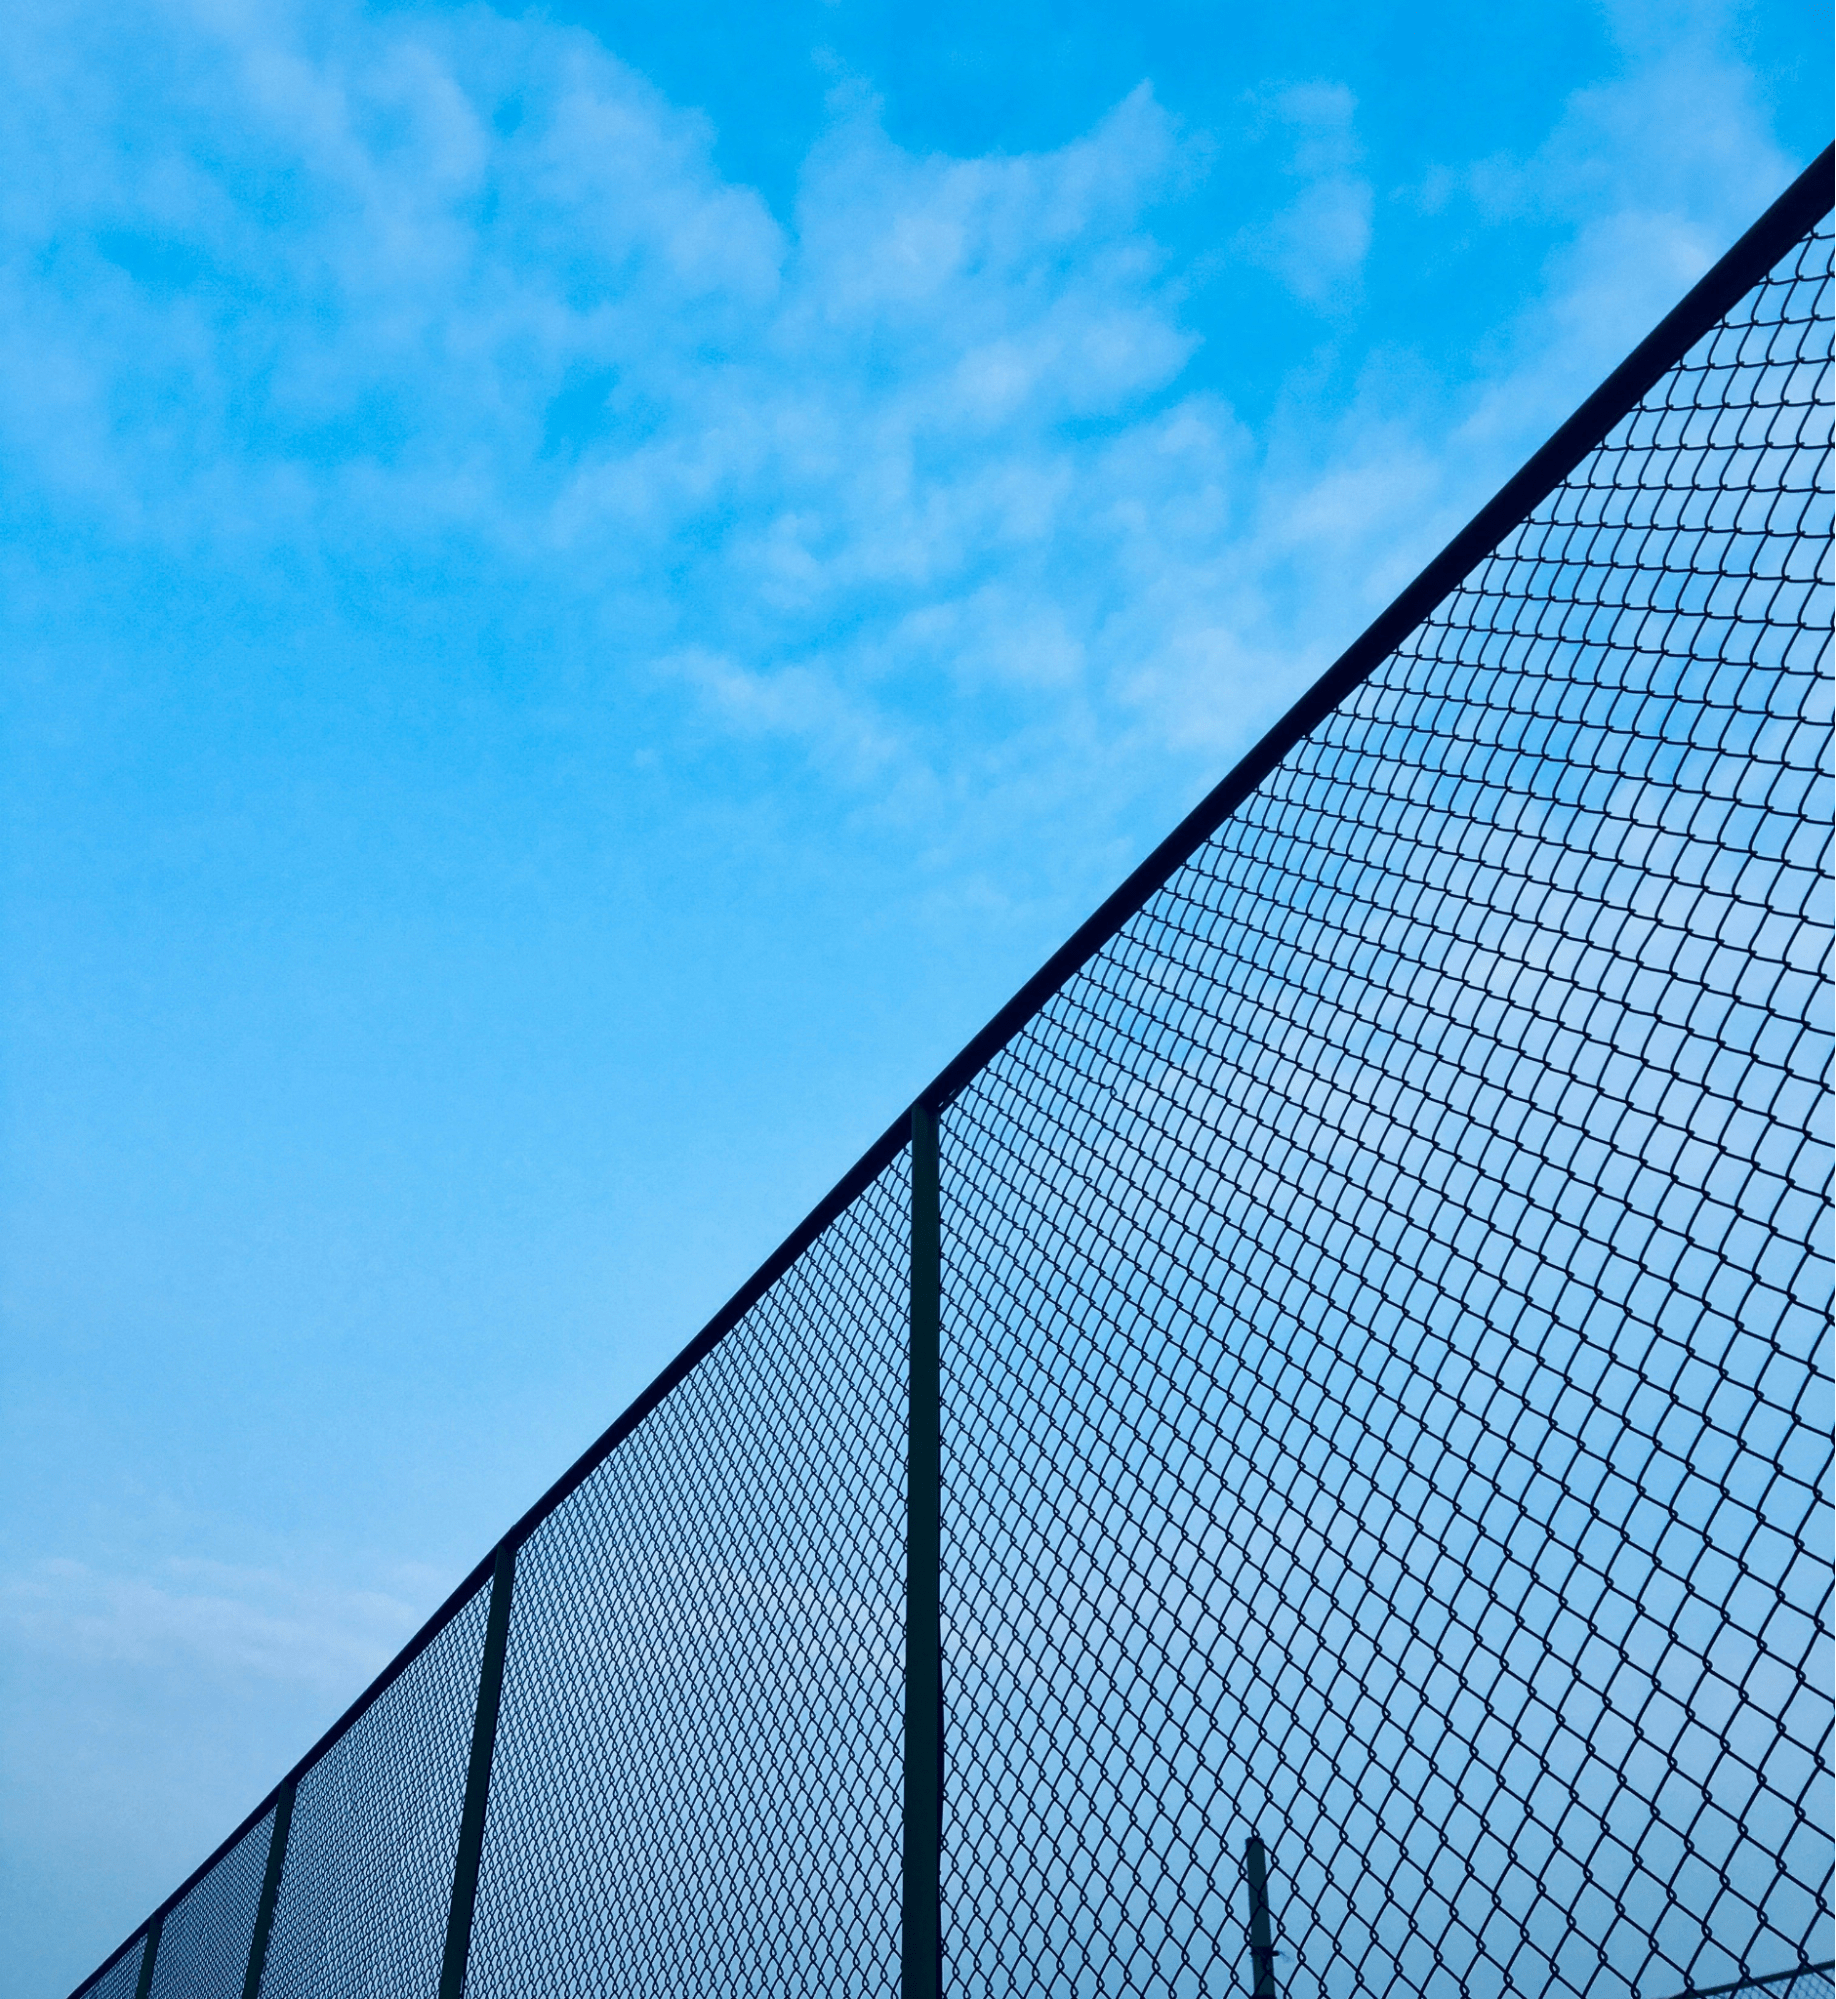 Temporary event fencing against clear view of sky